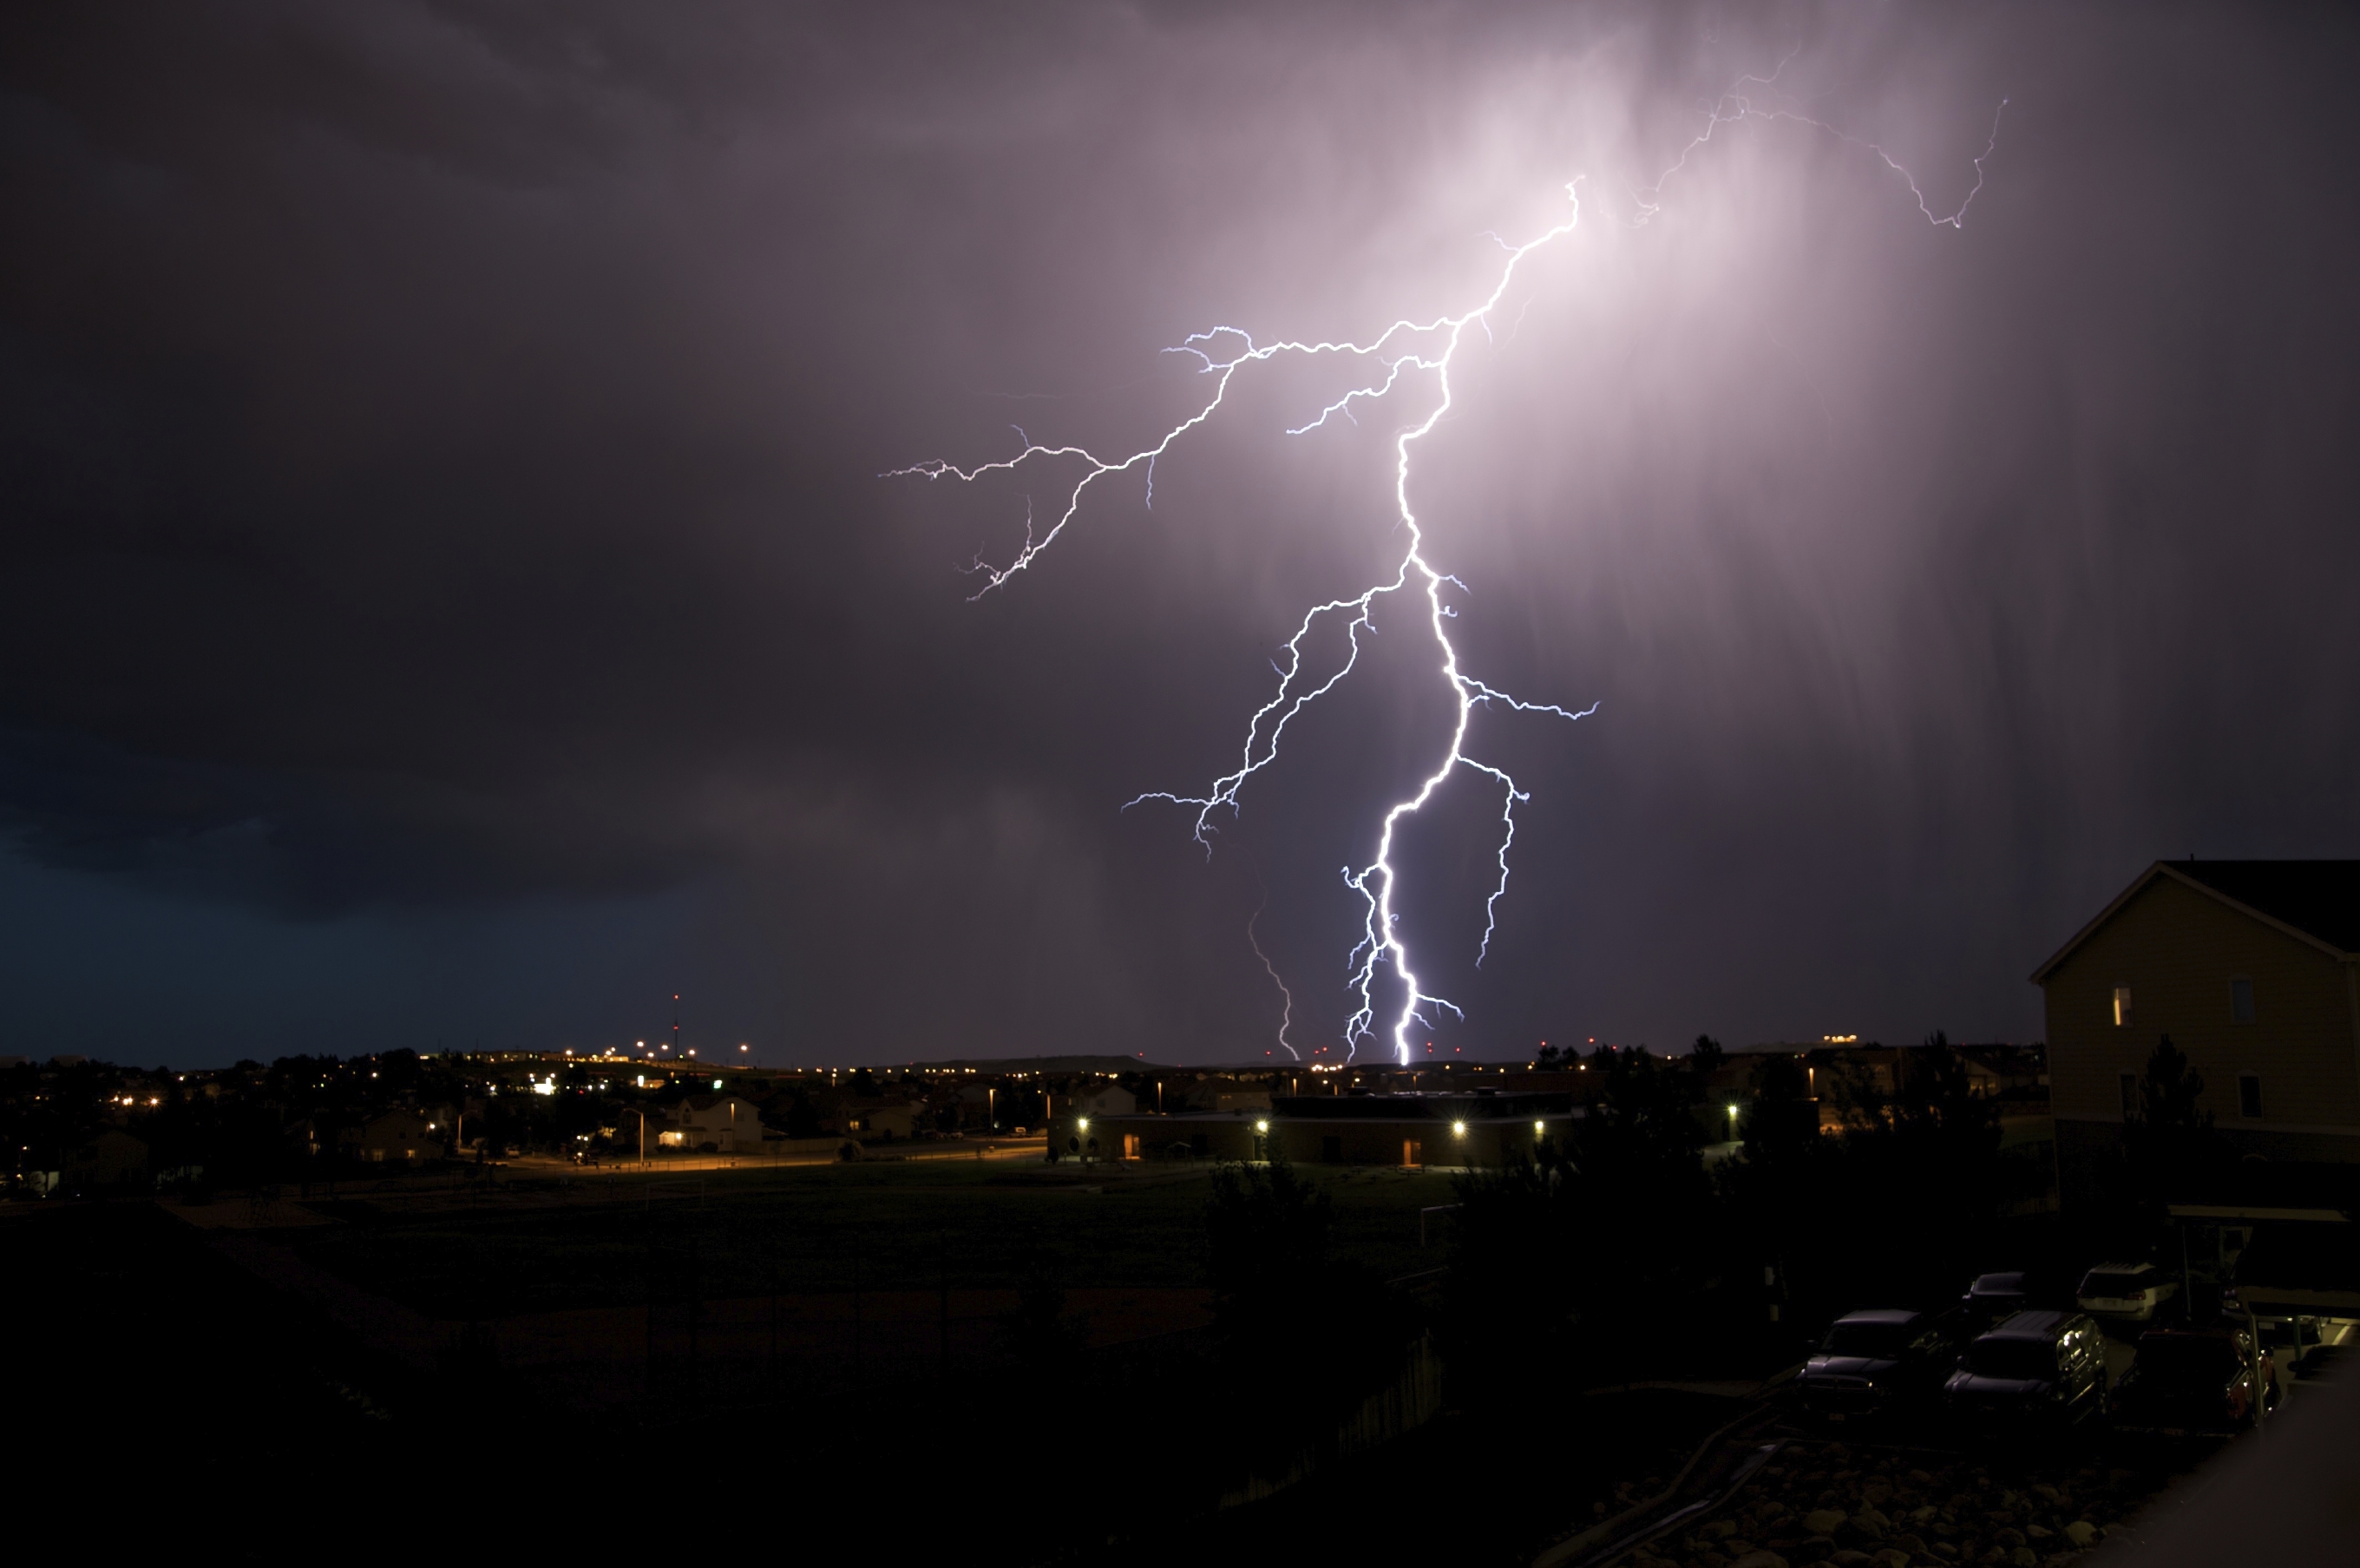 Thunder, lightning and tornadoes: Where do they come from?